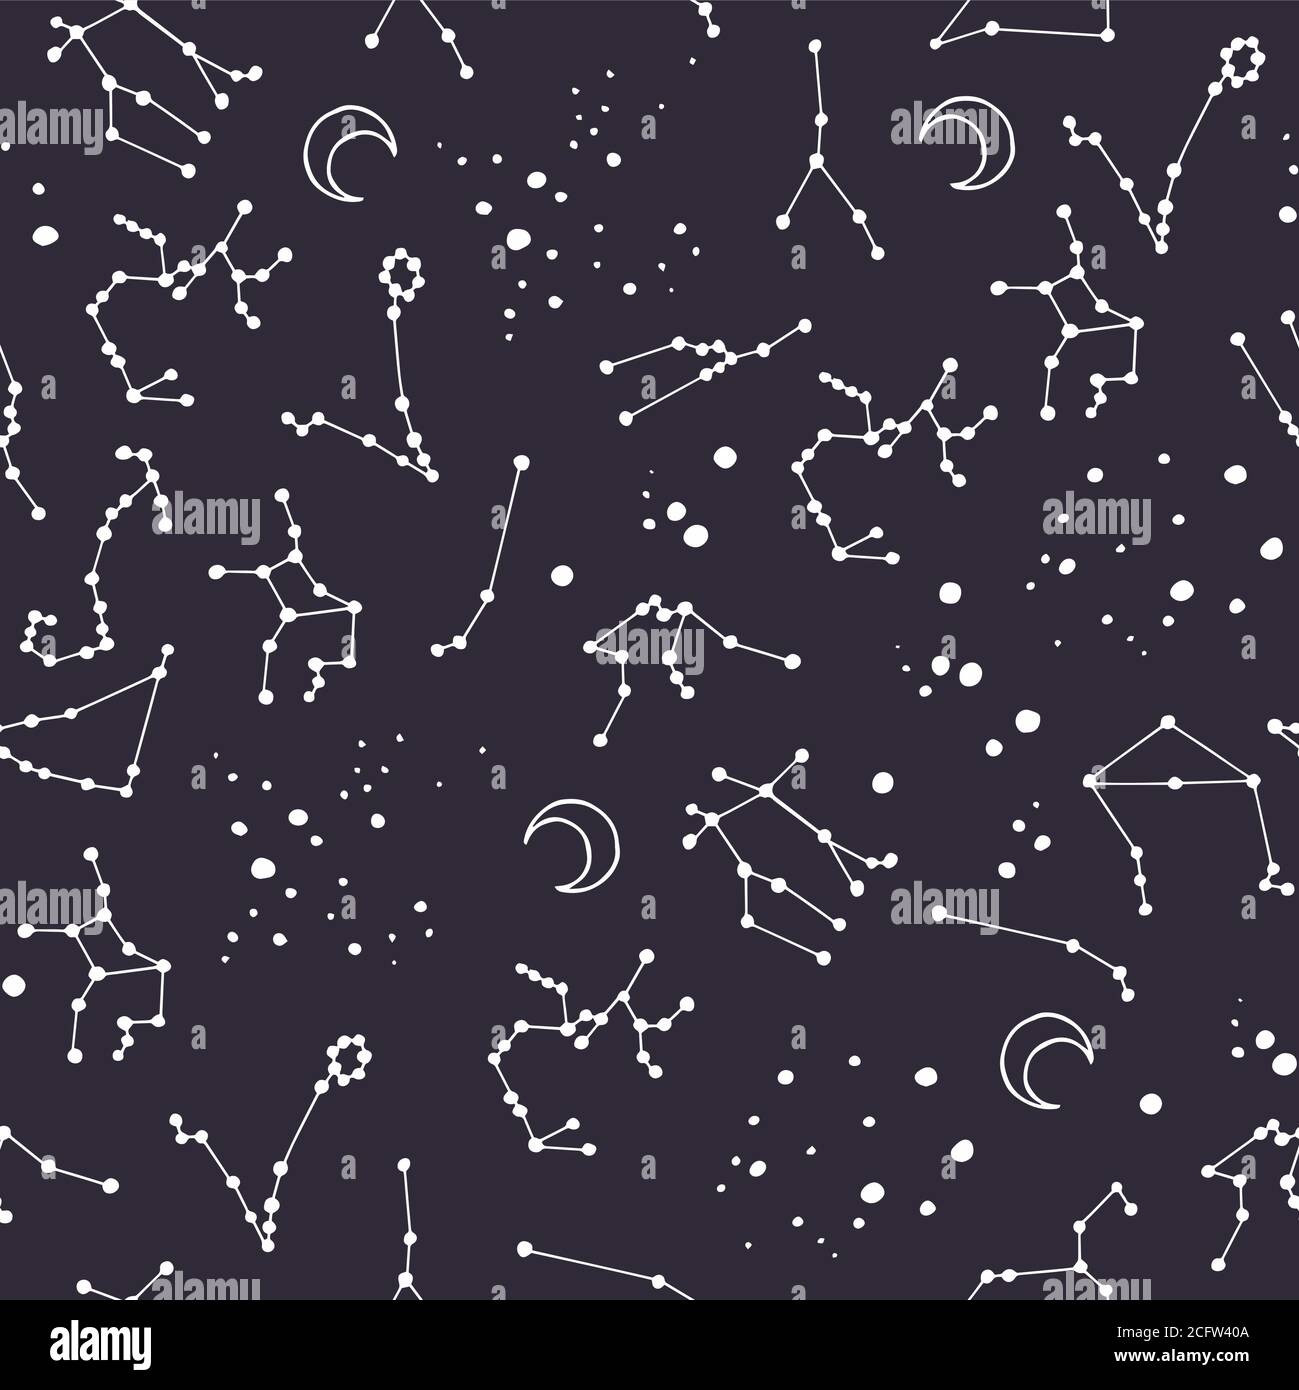 Constellations of the zodiac signs. Vector seamless pattern for design Stock Vector